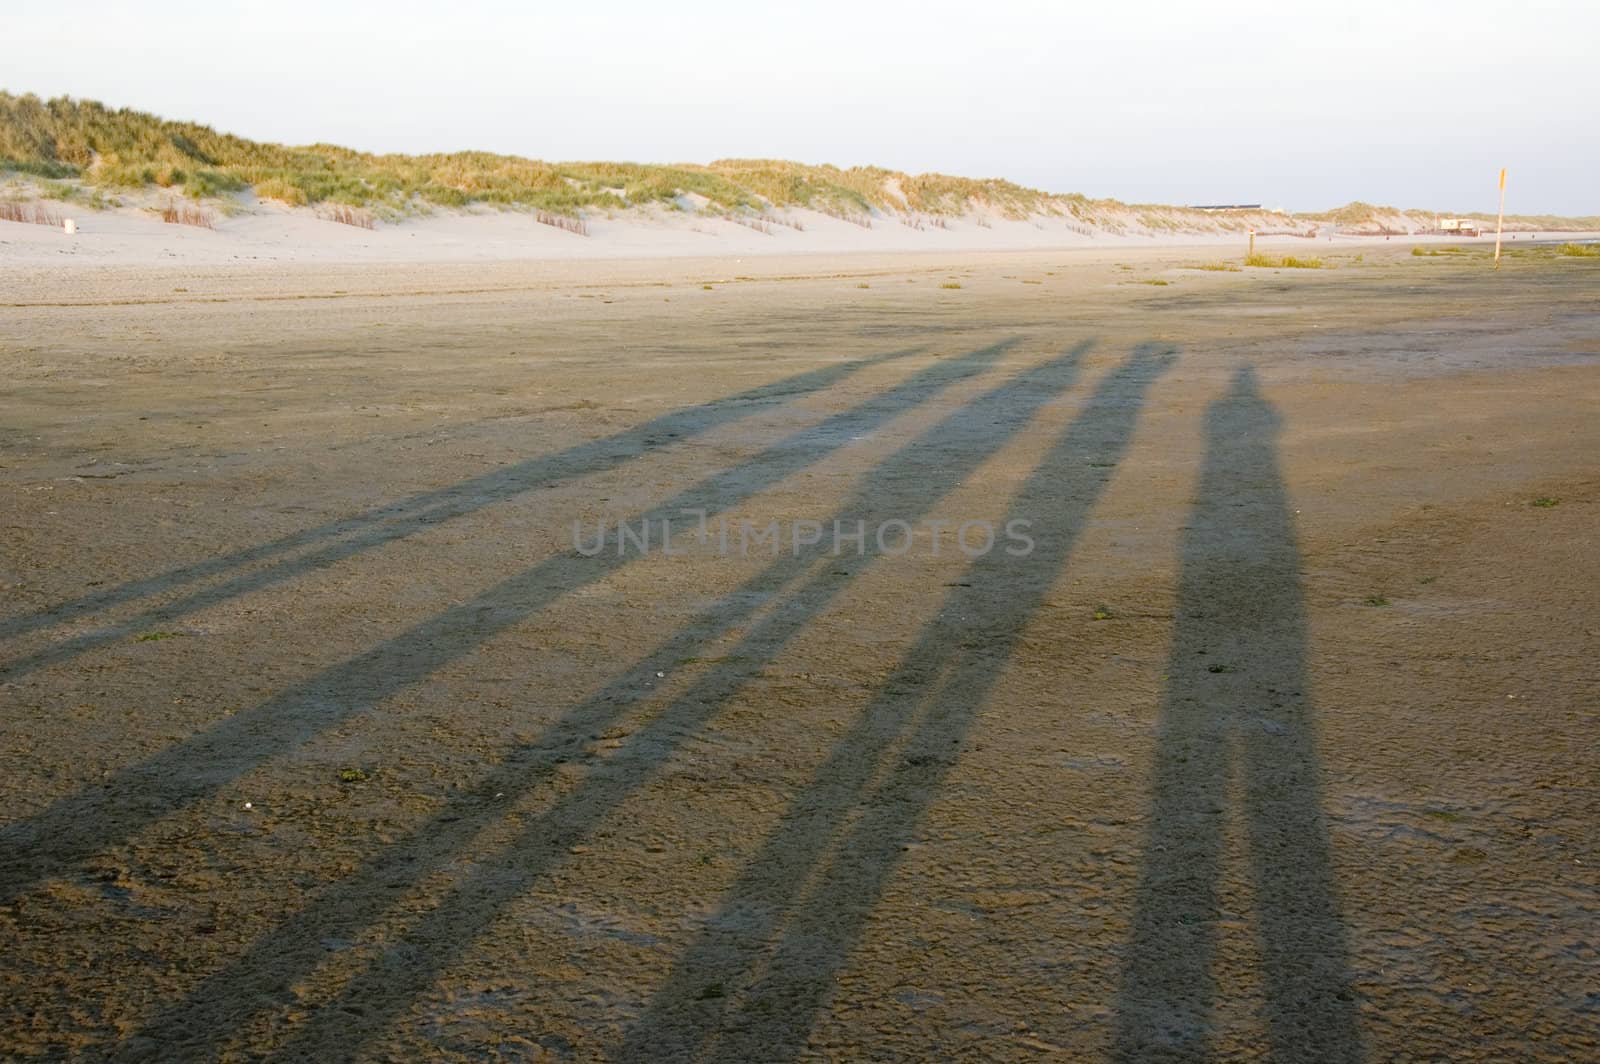 shadow of people on the beach during sunrise